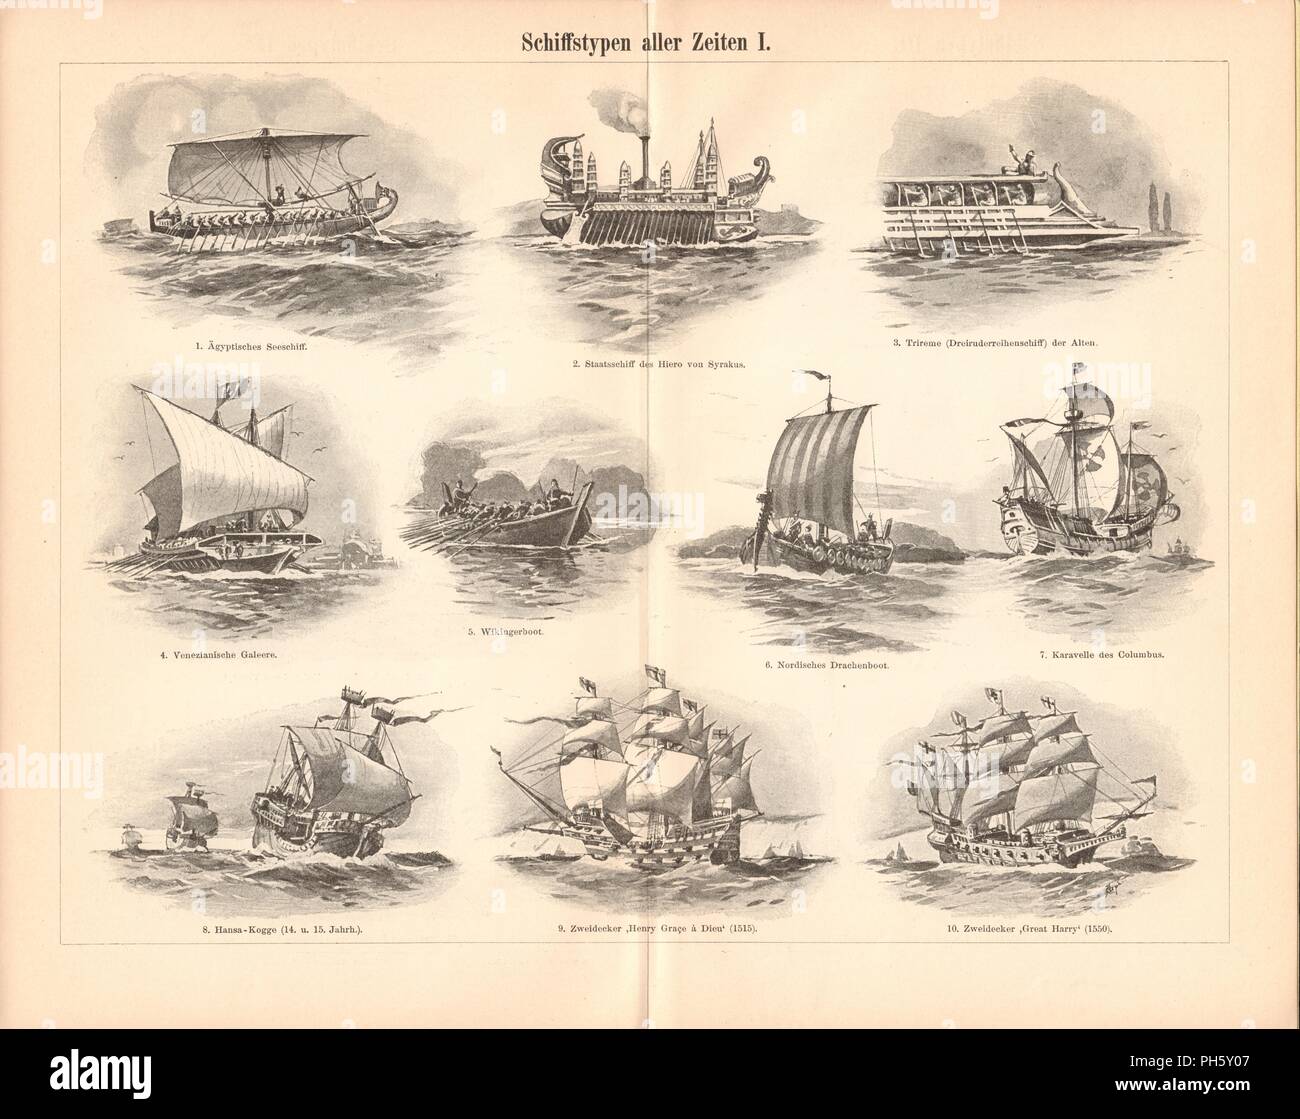 Antique Boat Illustration. Images contain a set of ships, originally illustrated for encyclopedias of the late 1800s. Stock Photo